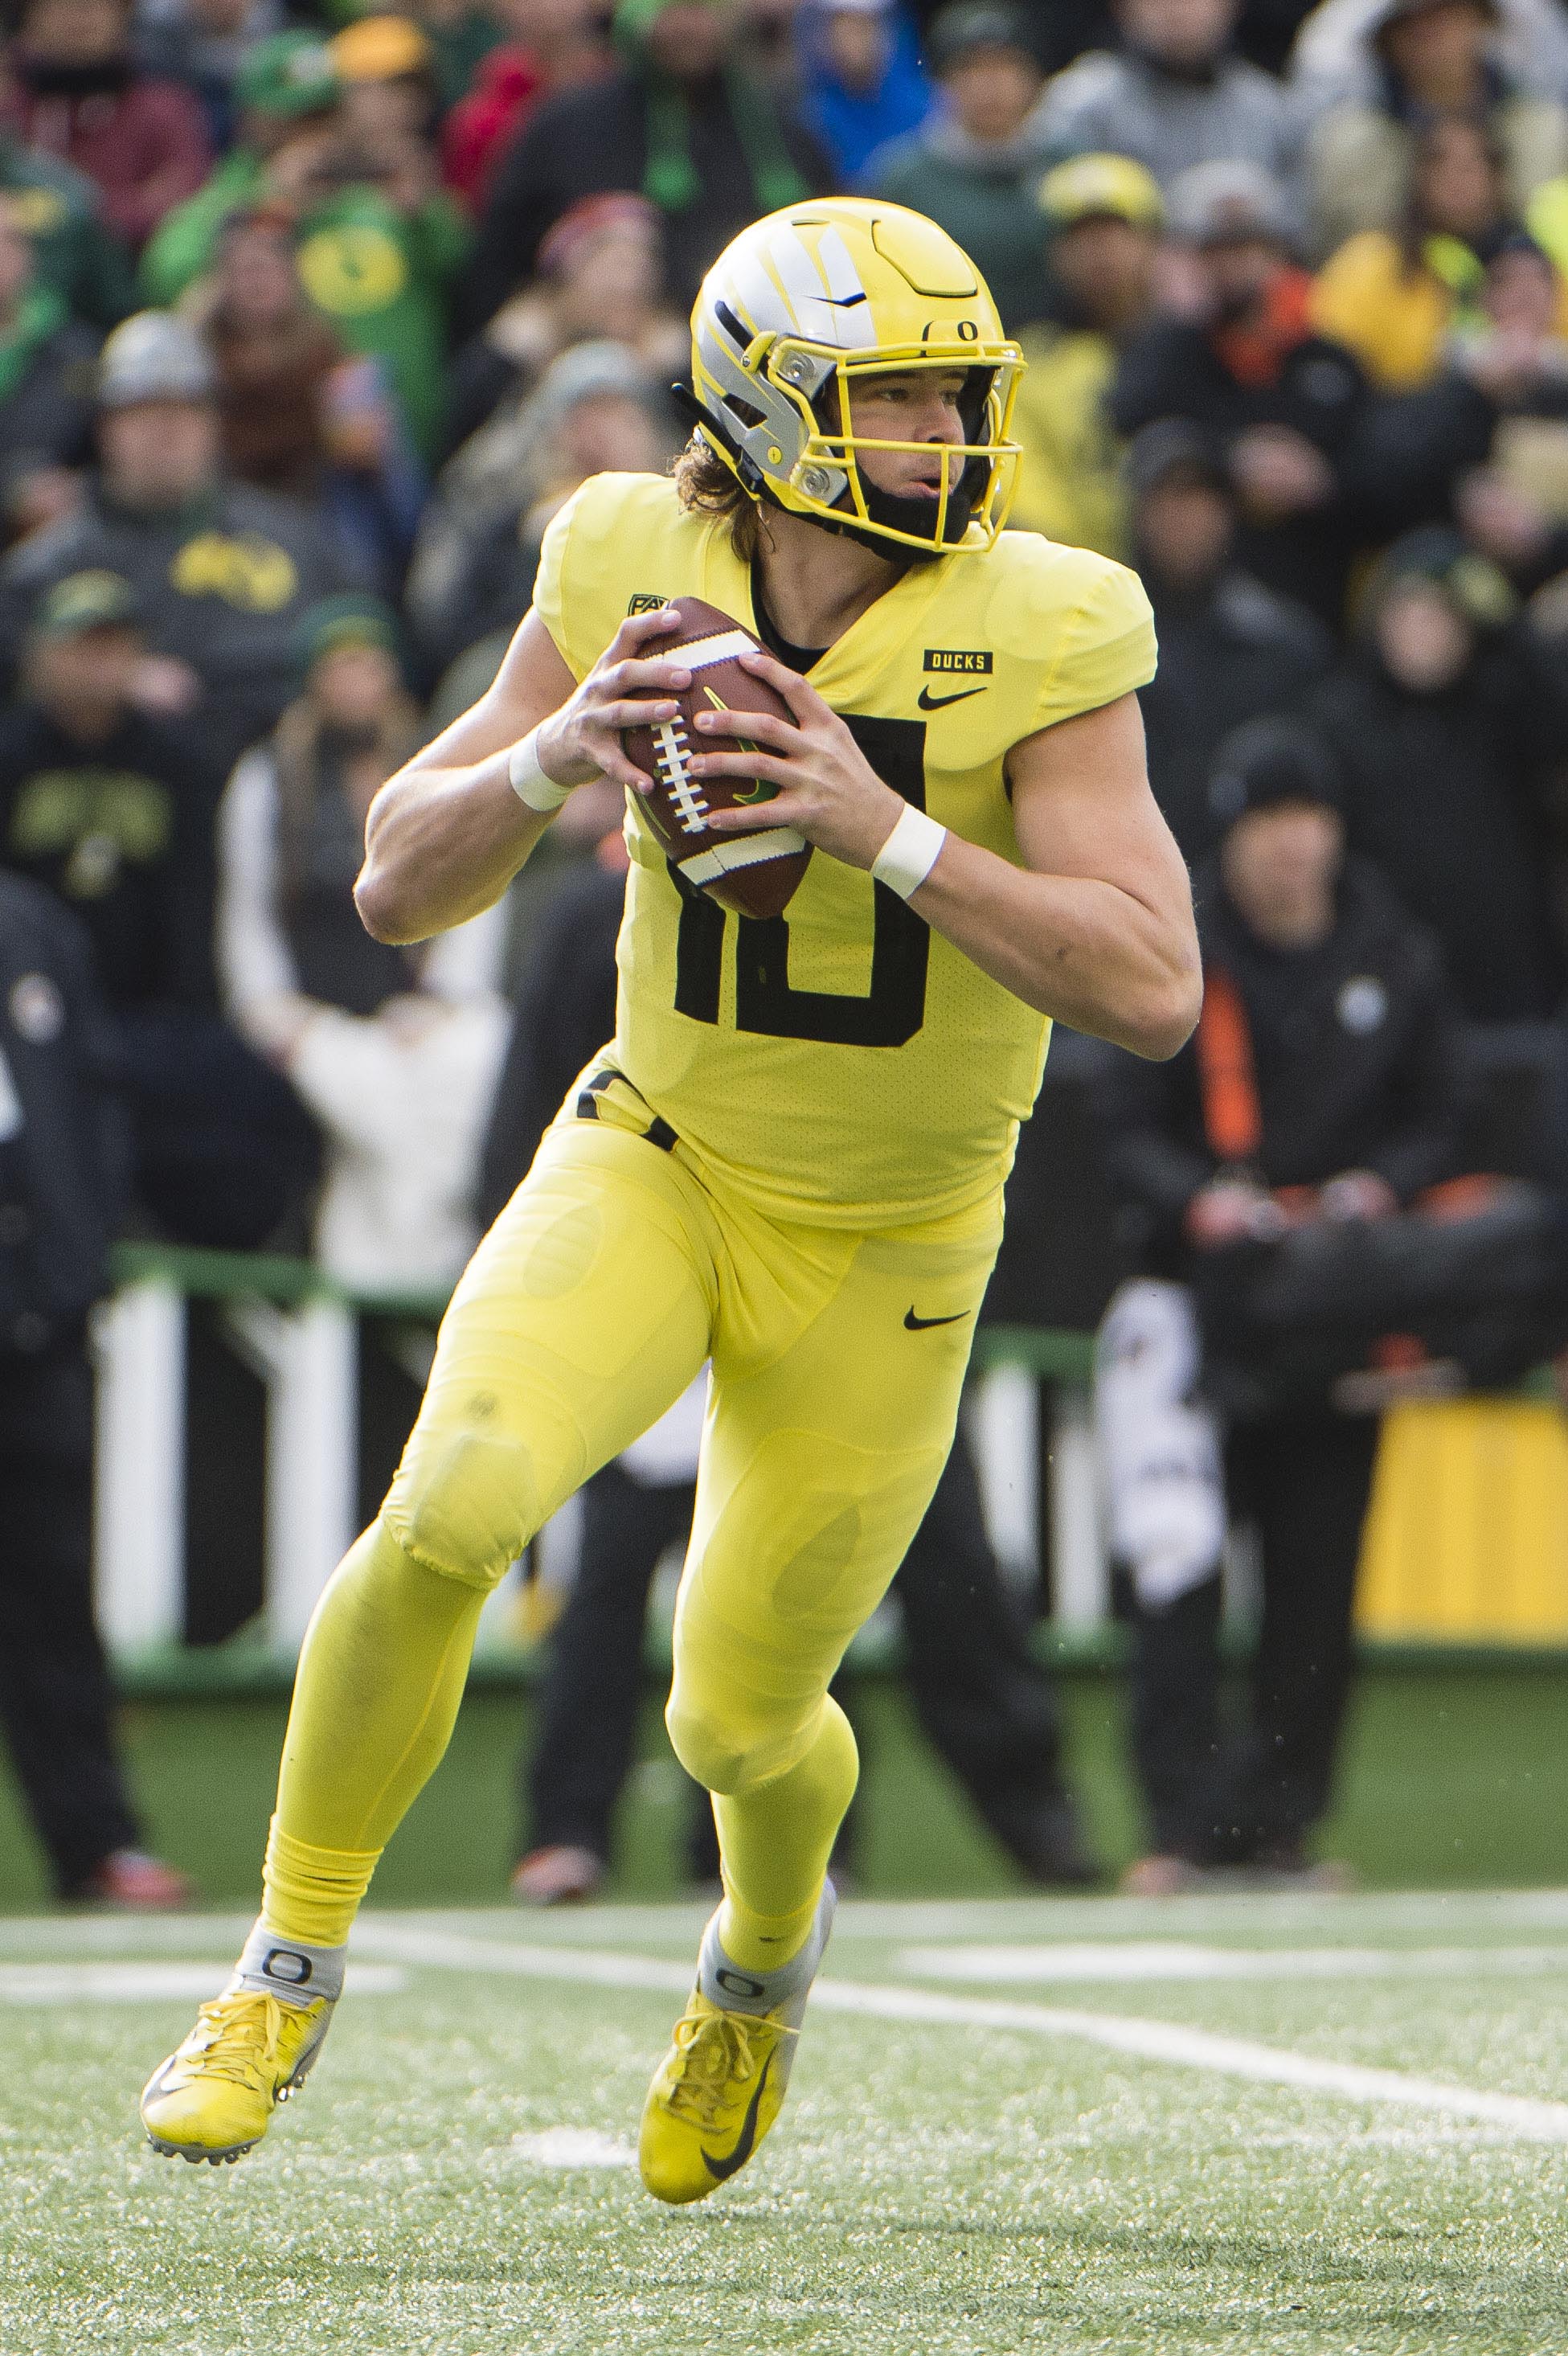 Justin Herbert of the Oregon Ducks looks to pass against the